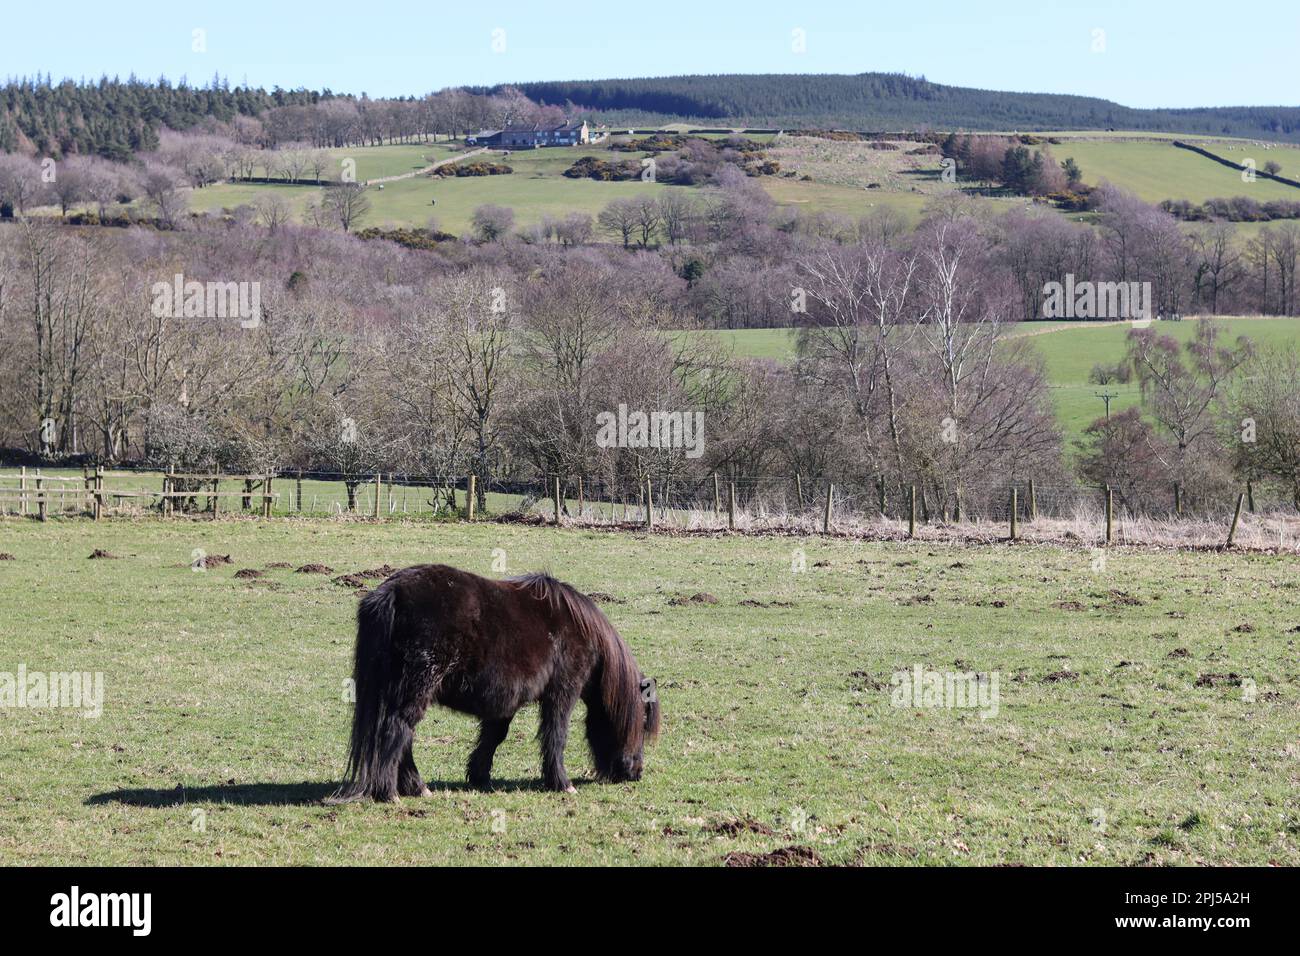 Shetland pony grazing peacefully in spring sunshine in a grassy field overlooking rural countryside Stock Photo